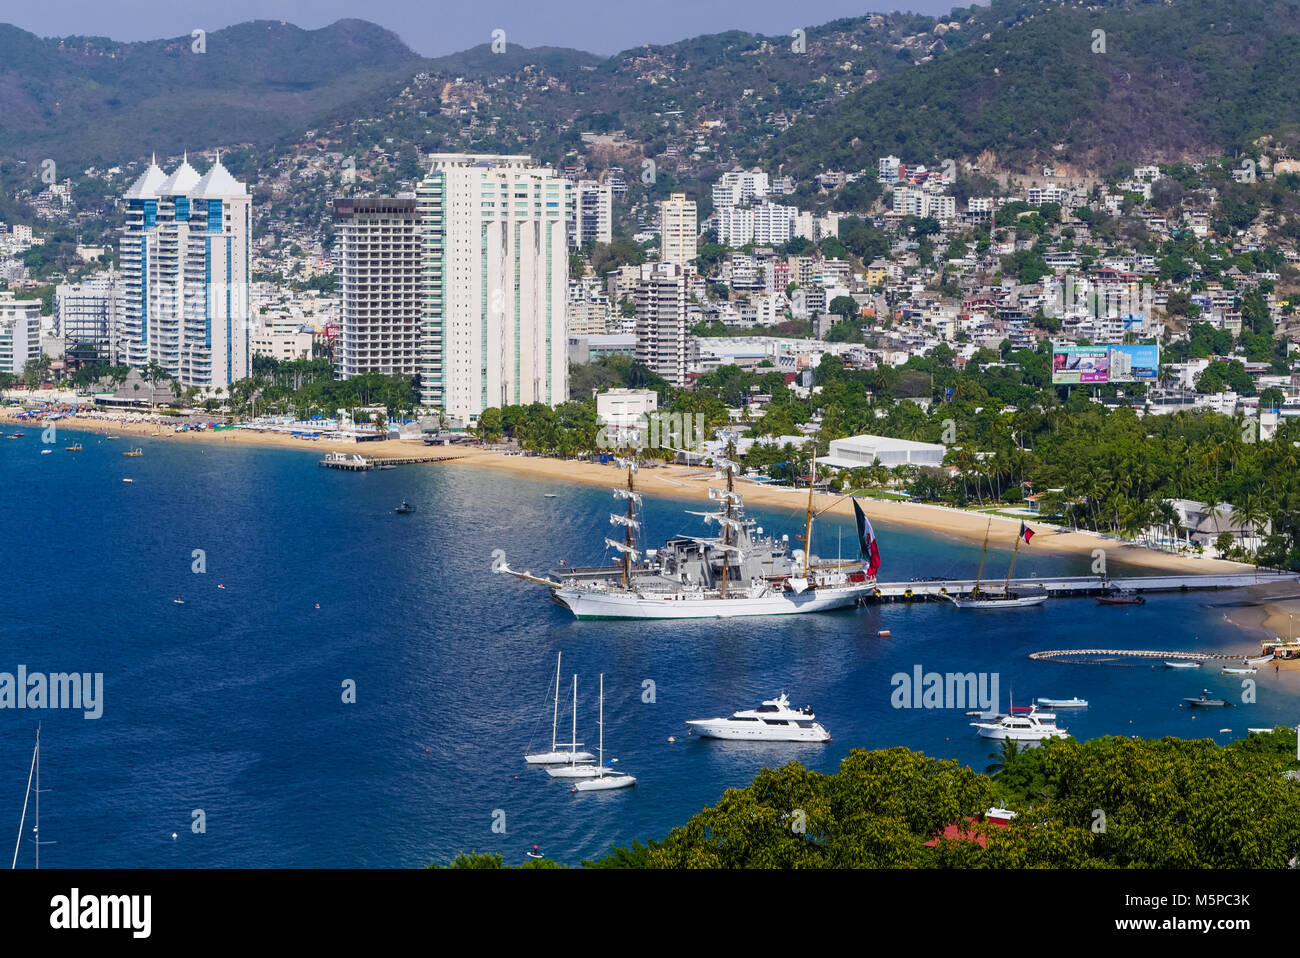 View of Acapulco Bay hotels and beach Stock Photo